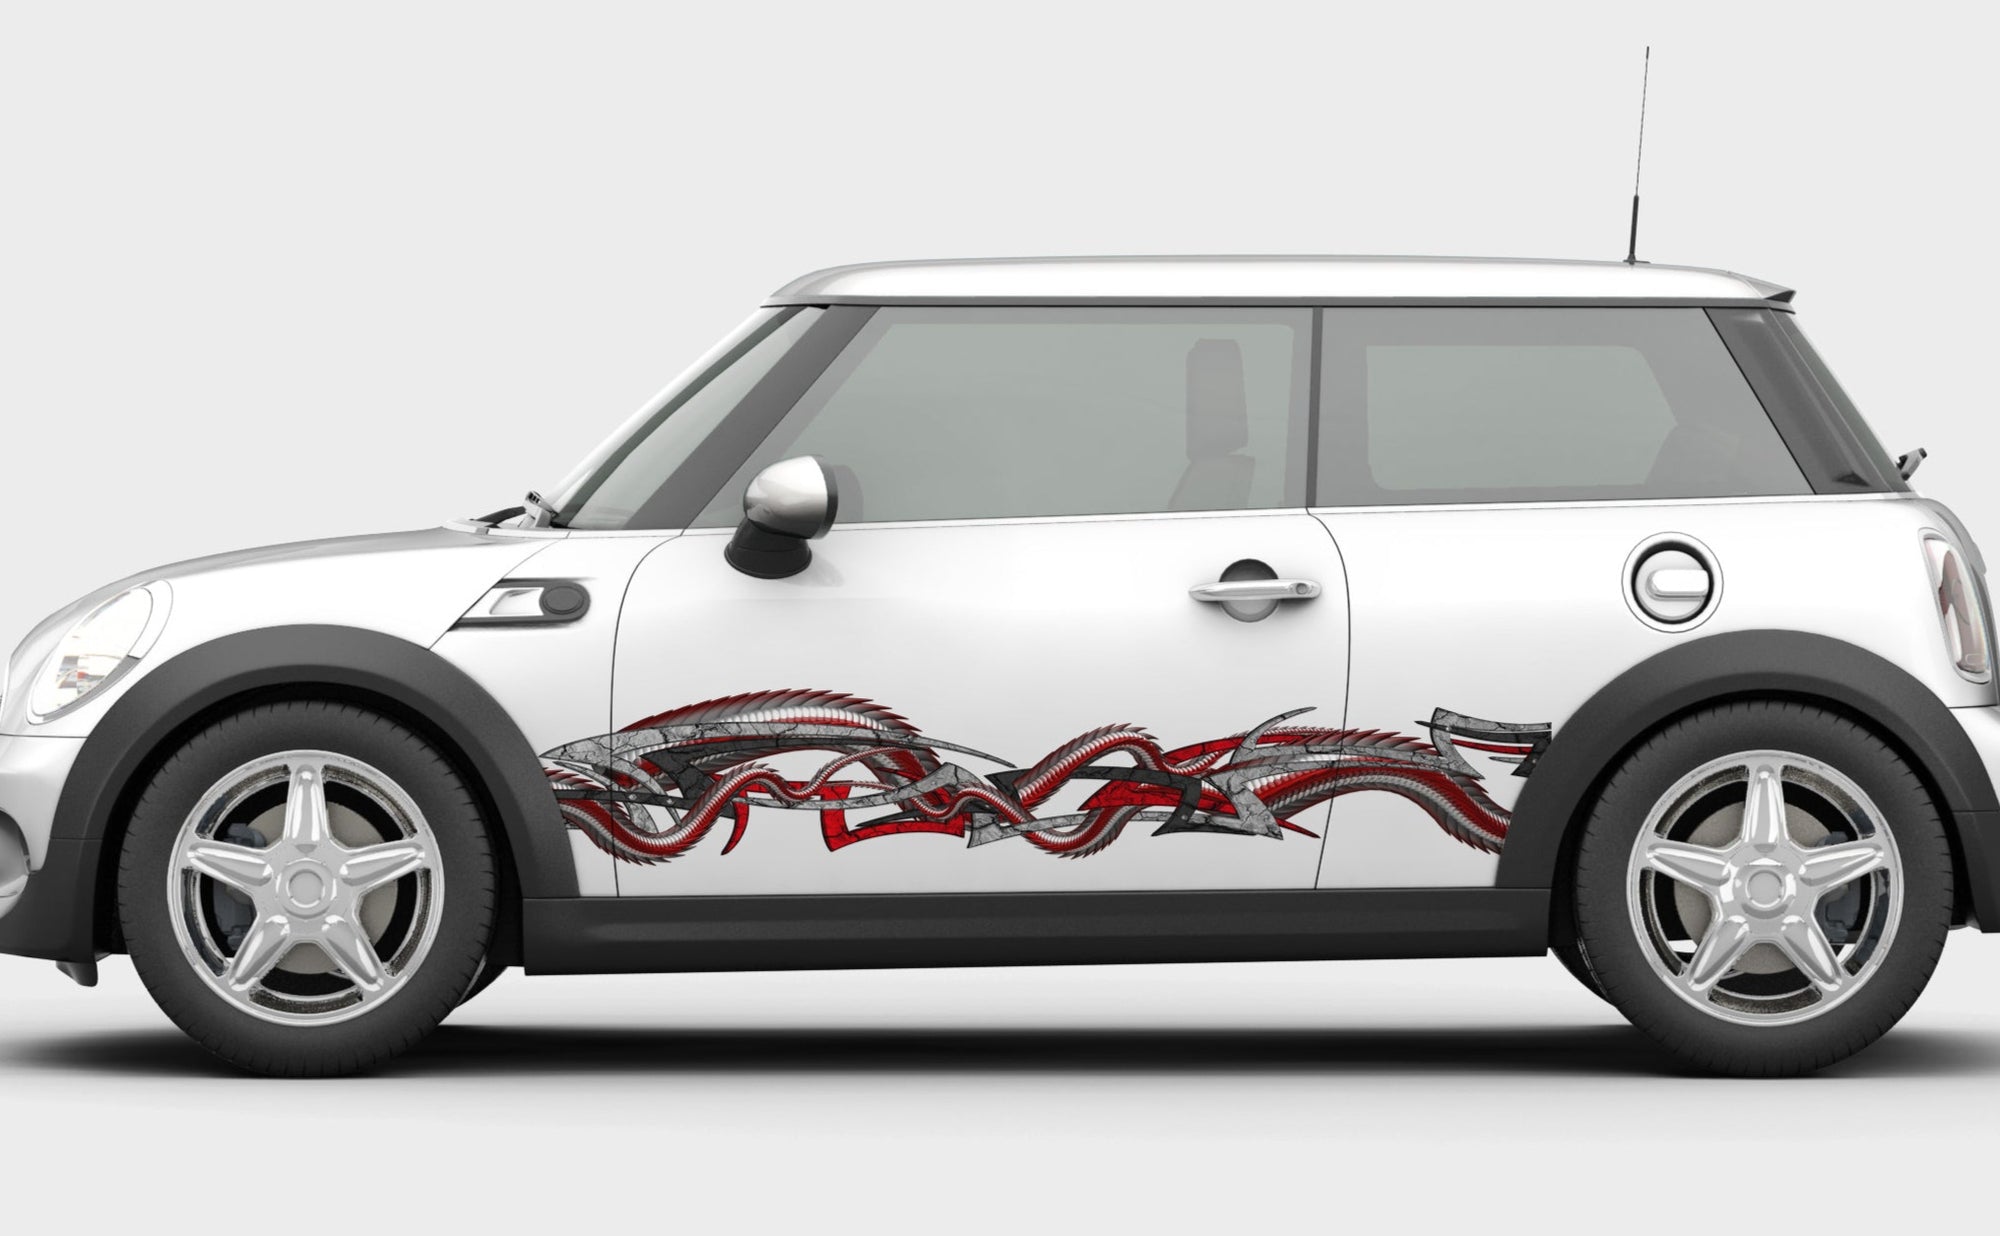 dragon tribal decal on the side  of mini cooper car